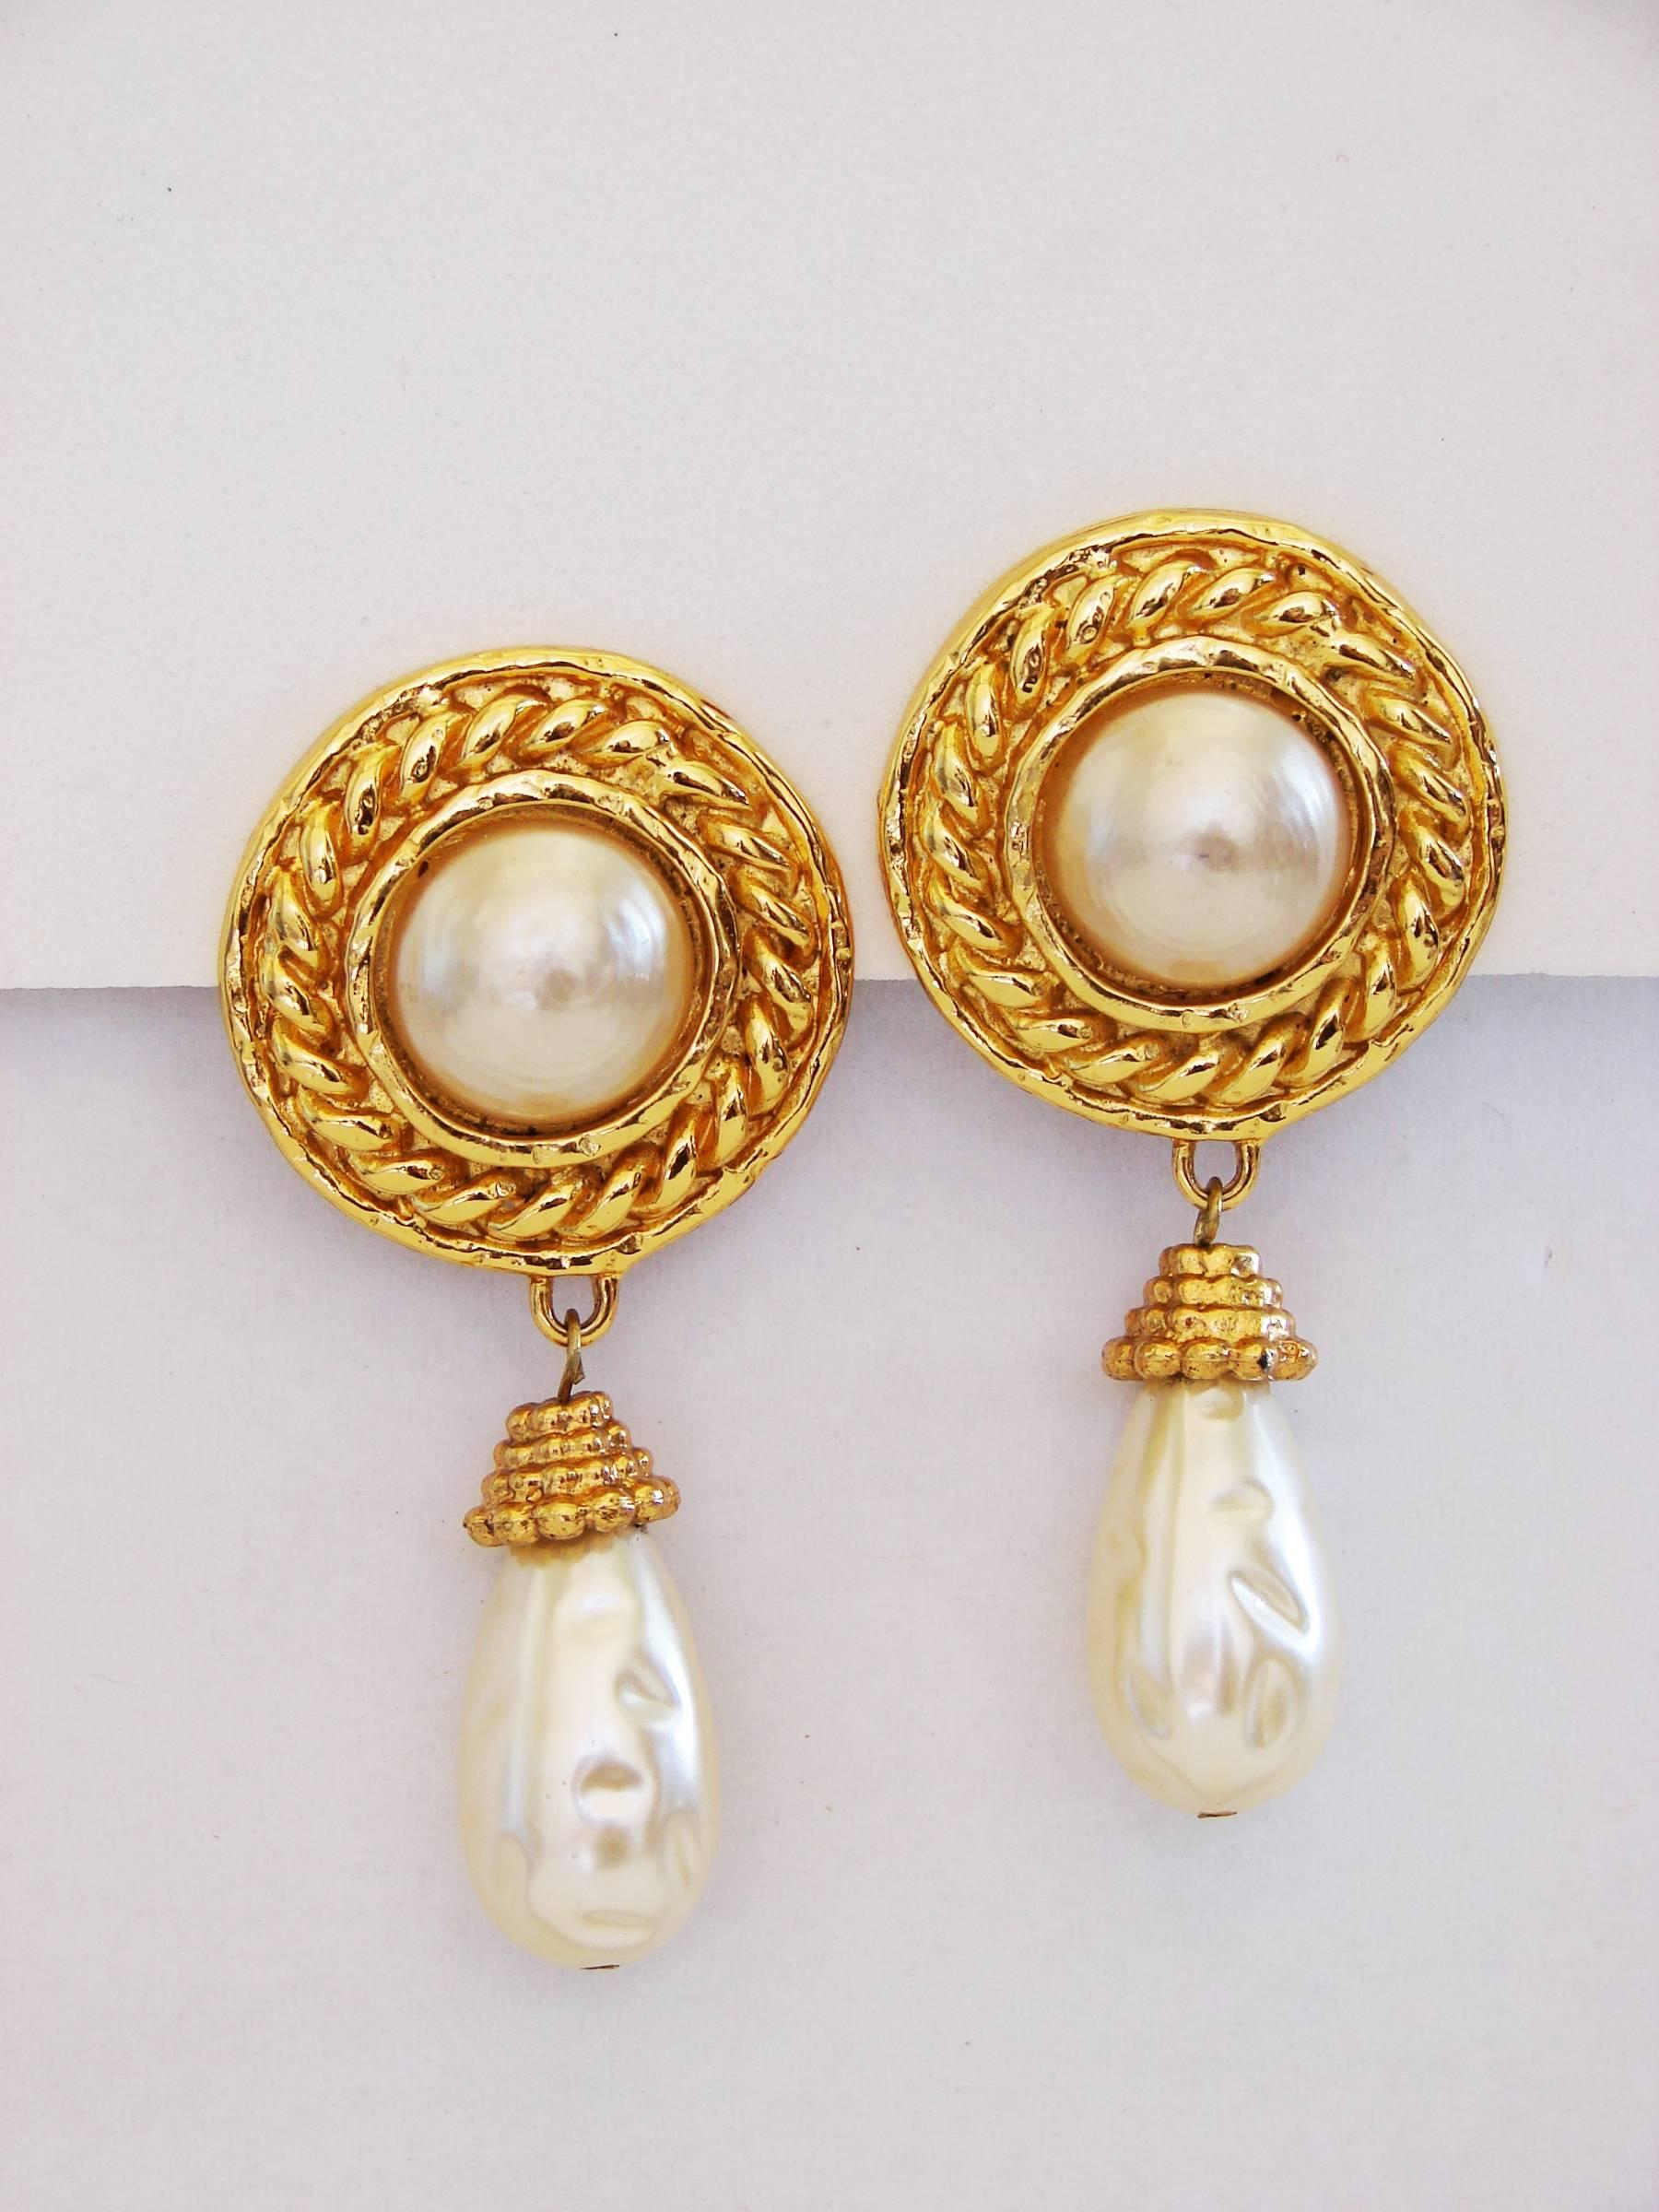 Authentic, preowned, vintage Edouard Rambaud large clip style Baroque pearl dangle earrings, circa the late 1970s.  Great statement earrings - and look so elegant when worn! 2.75in L. Preowned/vintage with minimal signs of prior wear.